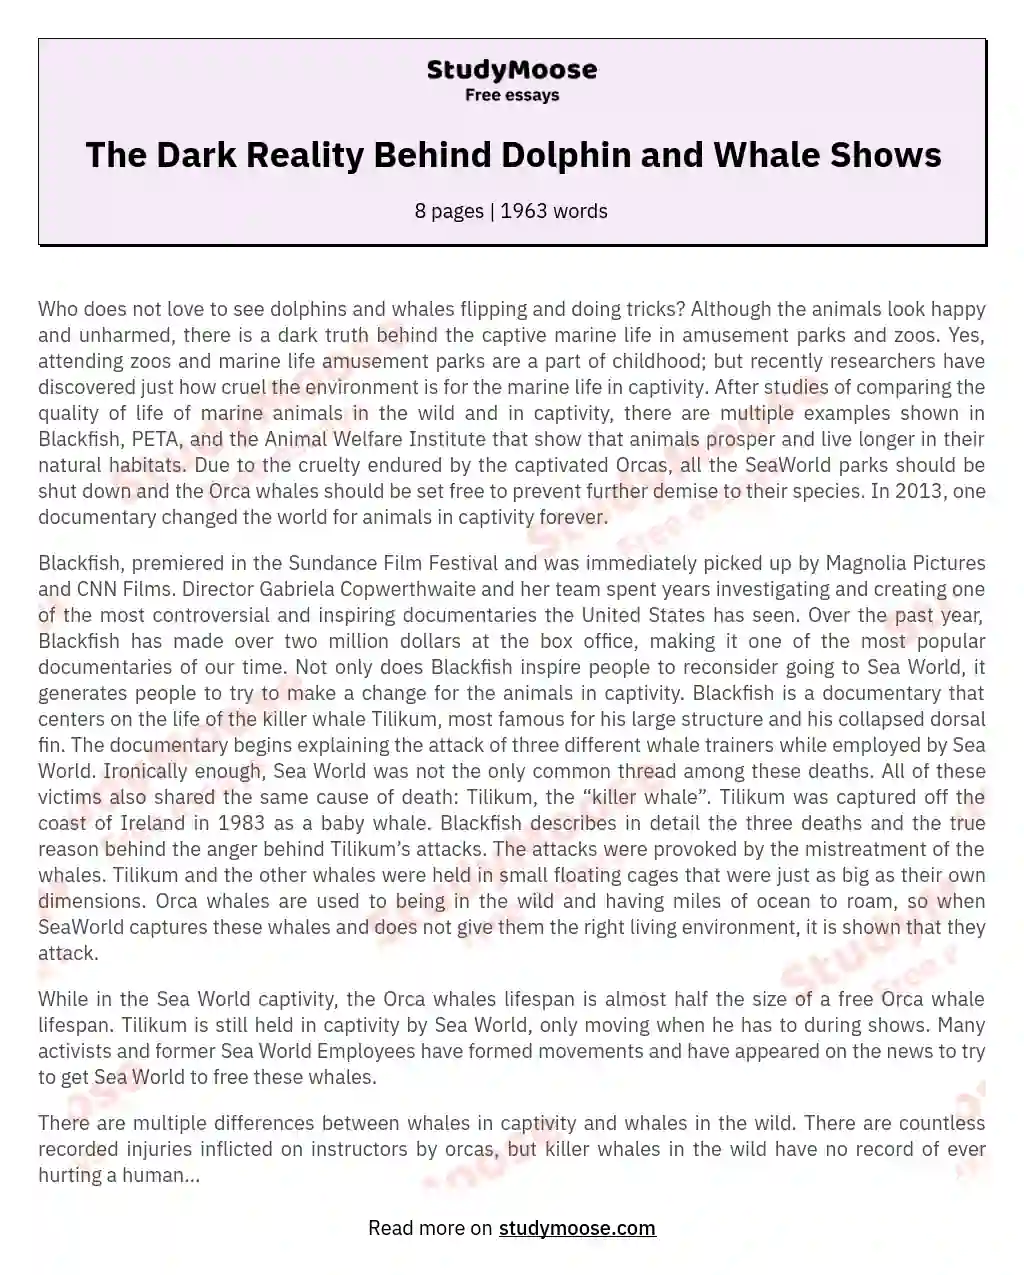 The Truth About Captive Marine Life: A Call to Release Orcas essay